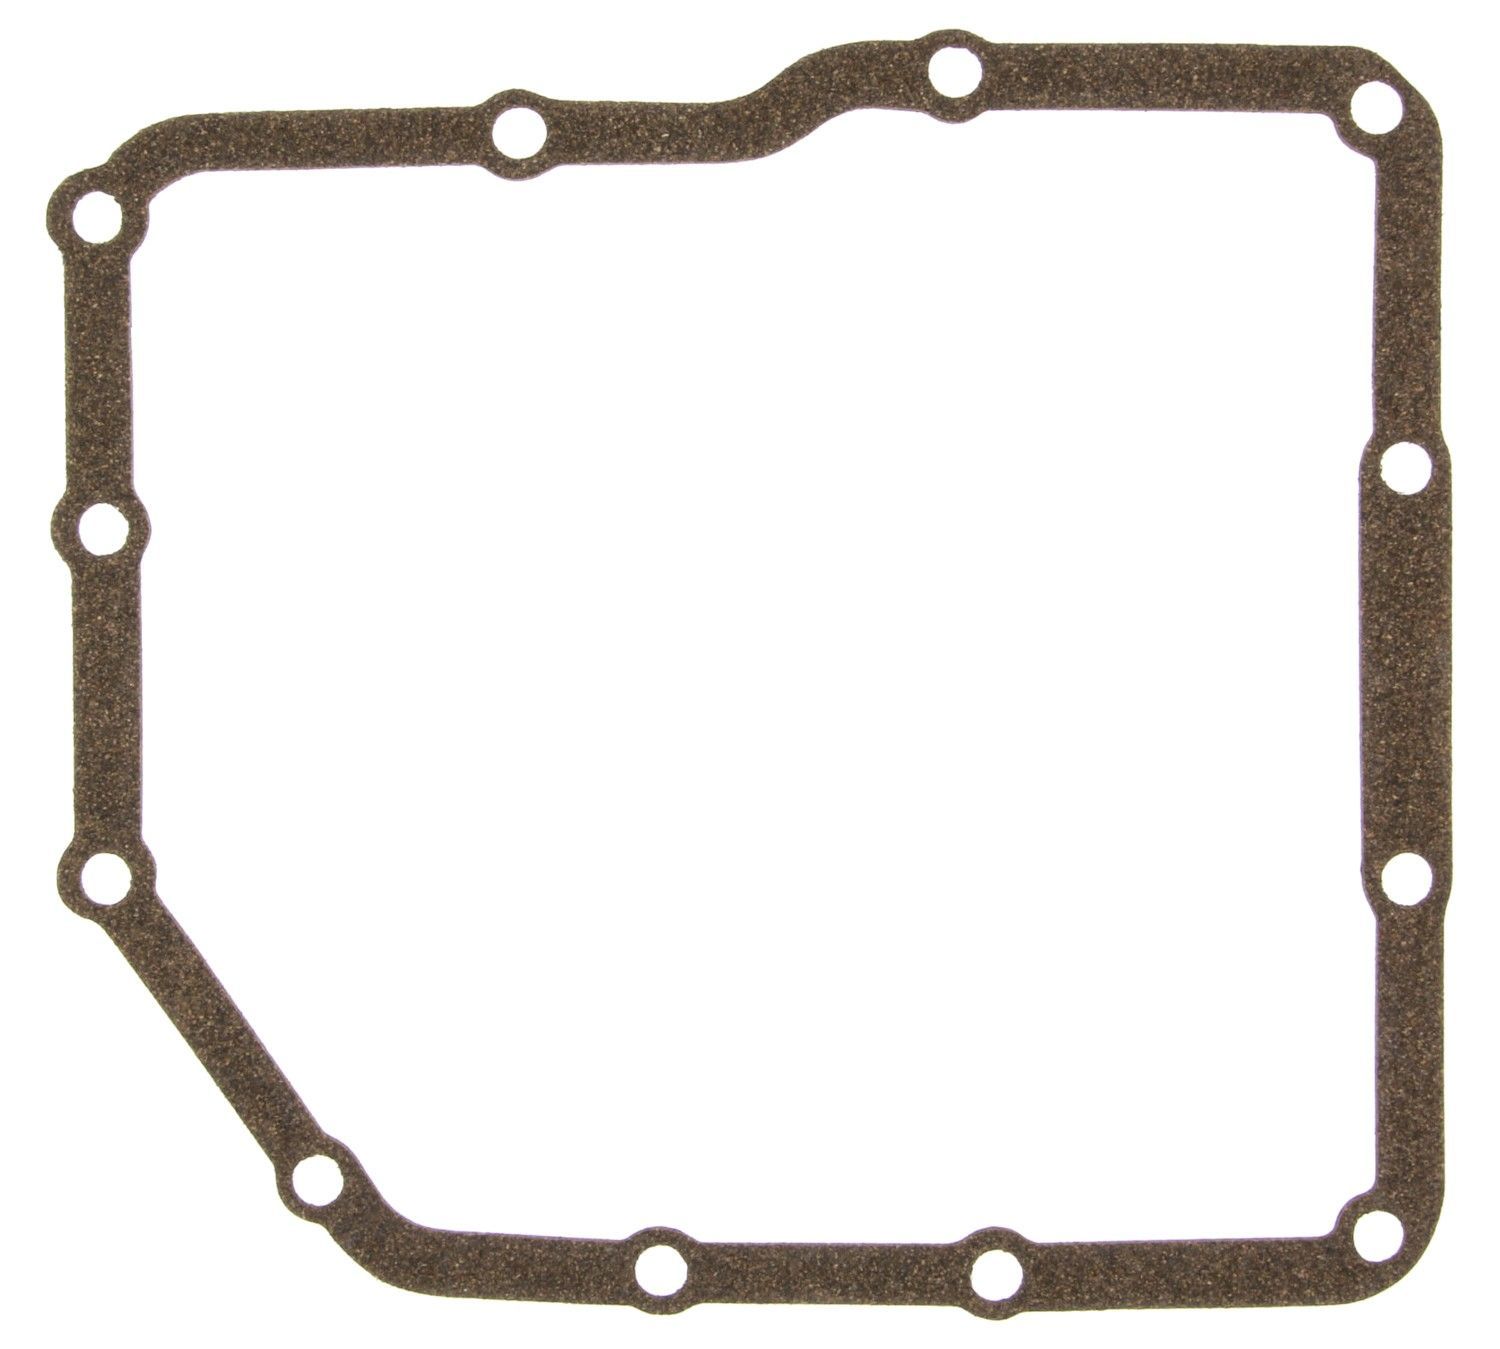 MAHLE ORIGINAL - Automatic Transmission Valve Body Cover Gasket - MHL W39111